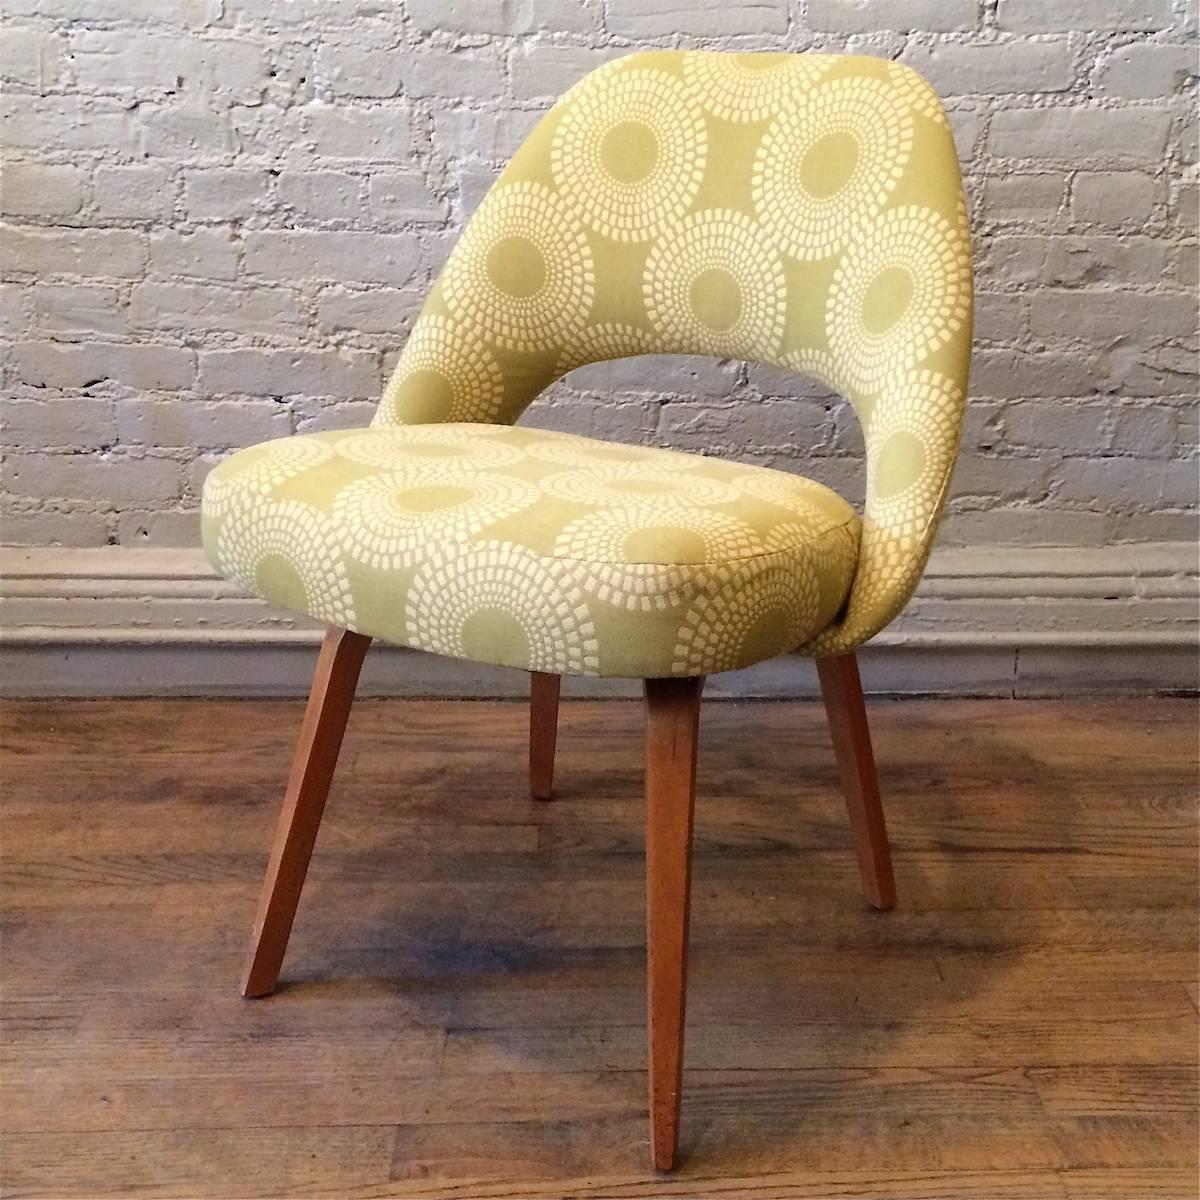 Executive side chair by Eero Saarinen for Knoll with wood legs is newly upholstered in a yellow cotton print.